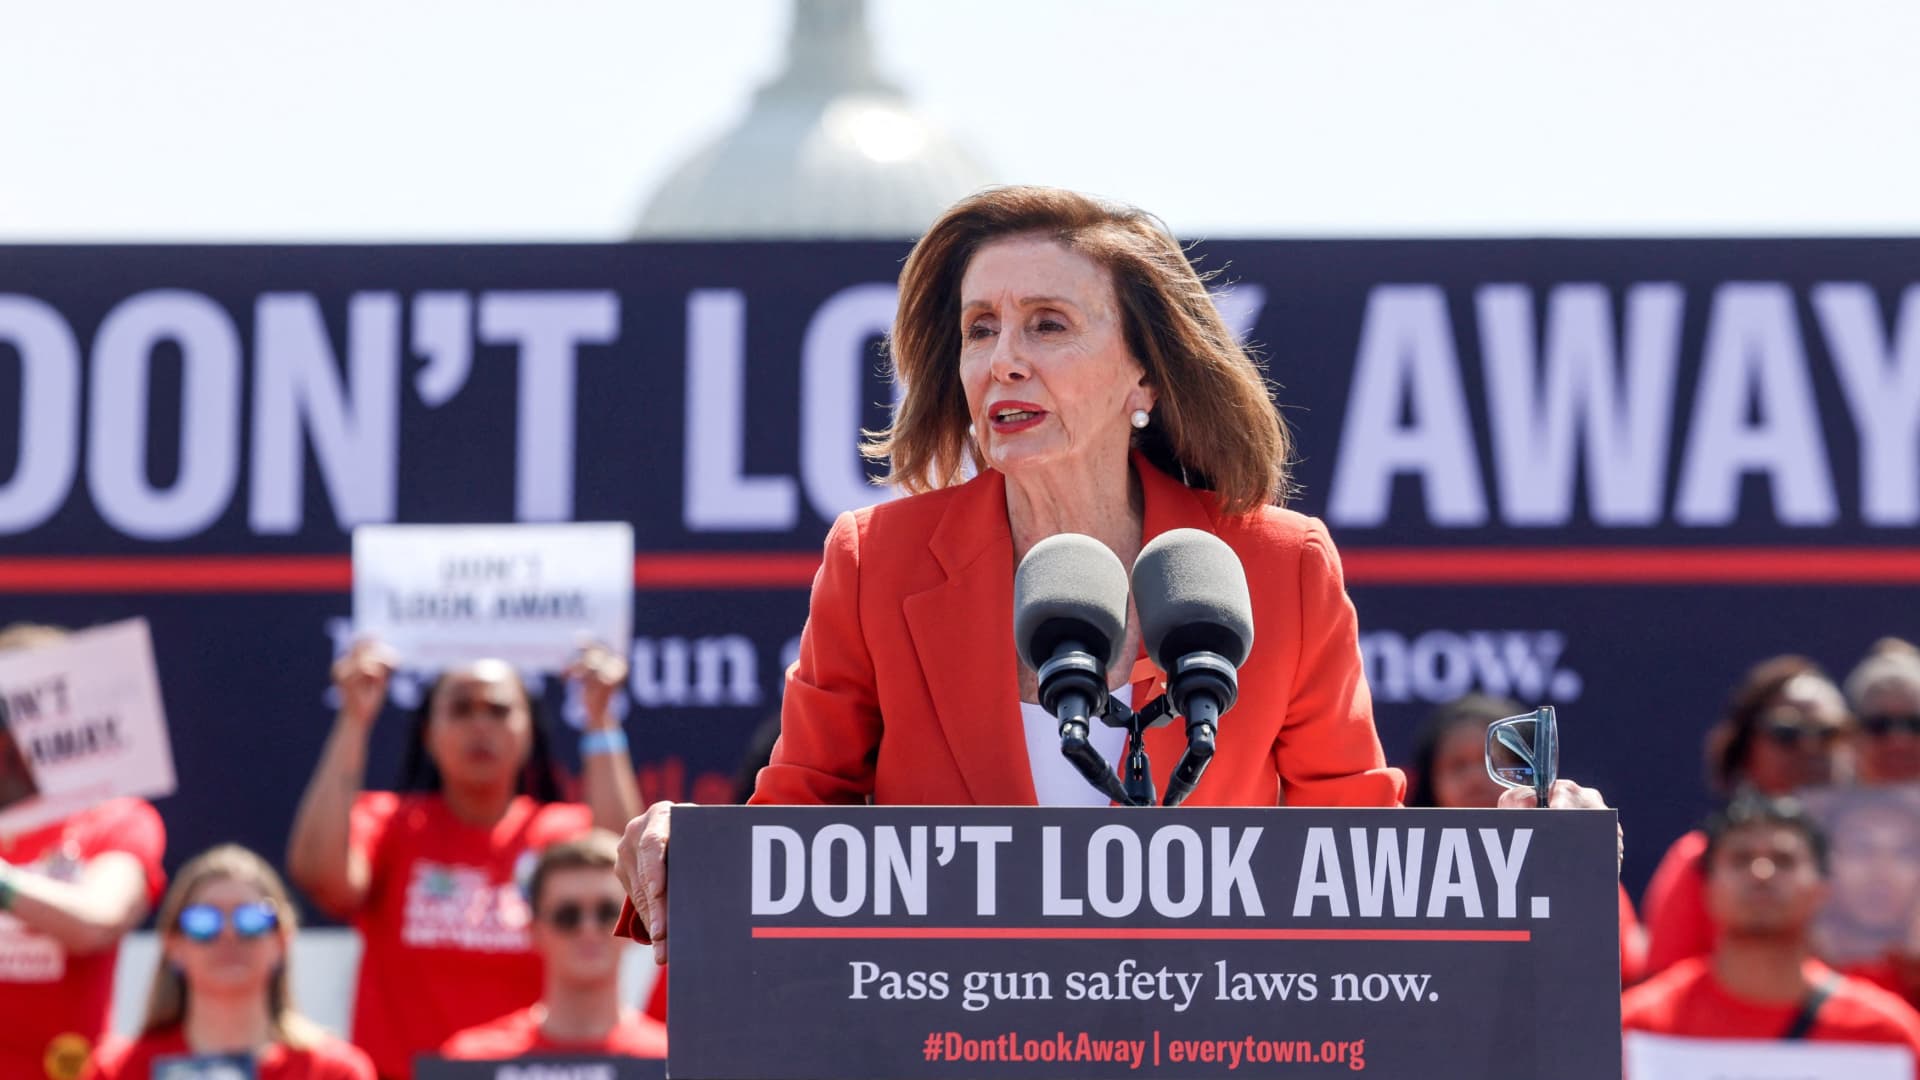 House passes sweeping gun bill to raise assault rifle purchase age to 21; plan faces long odds in the Senate